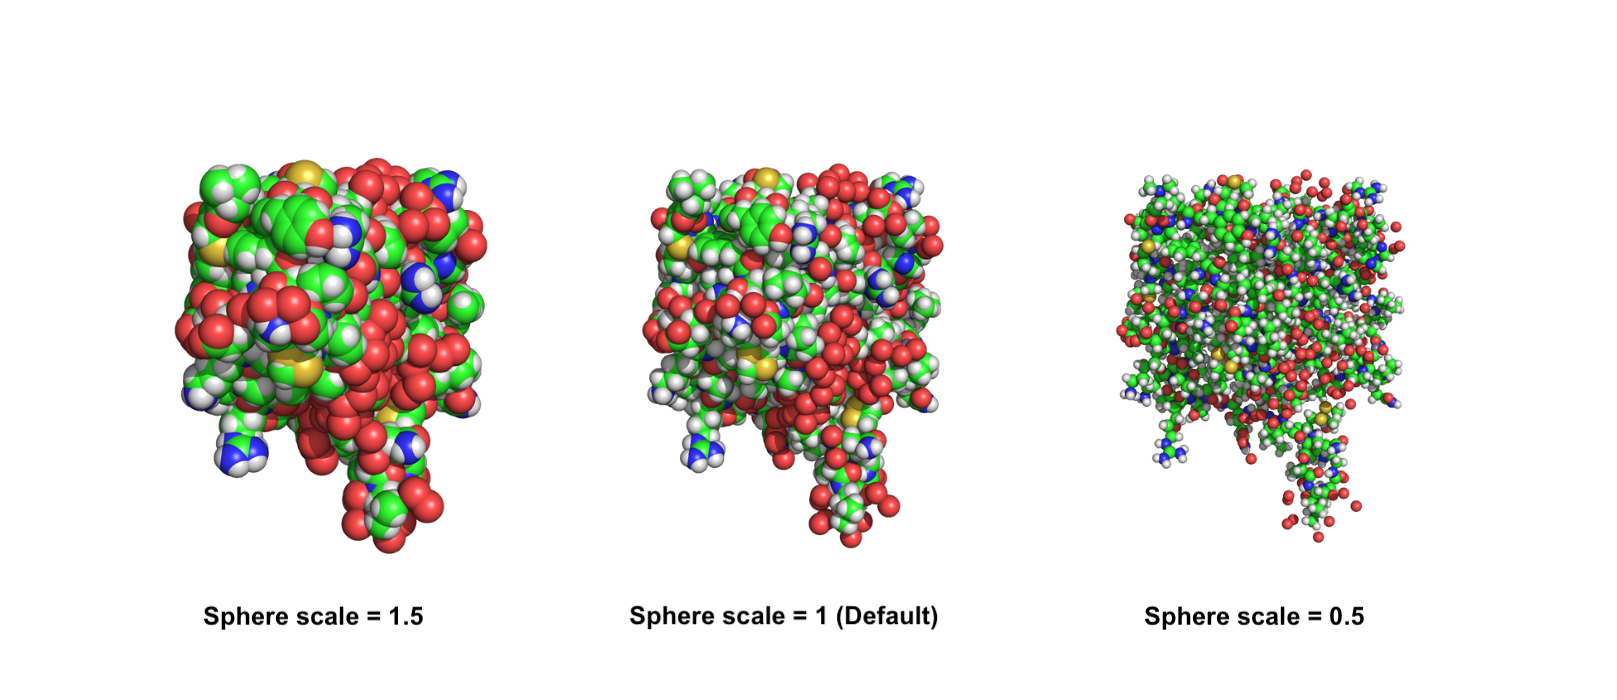  Different scales for sphere representation of a protein in Pymol